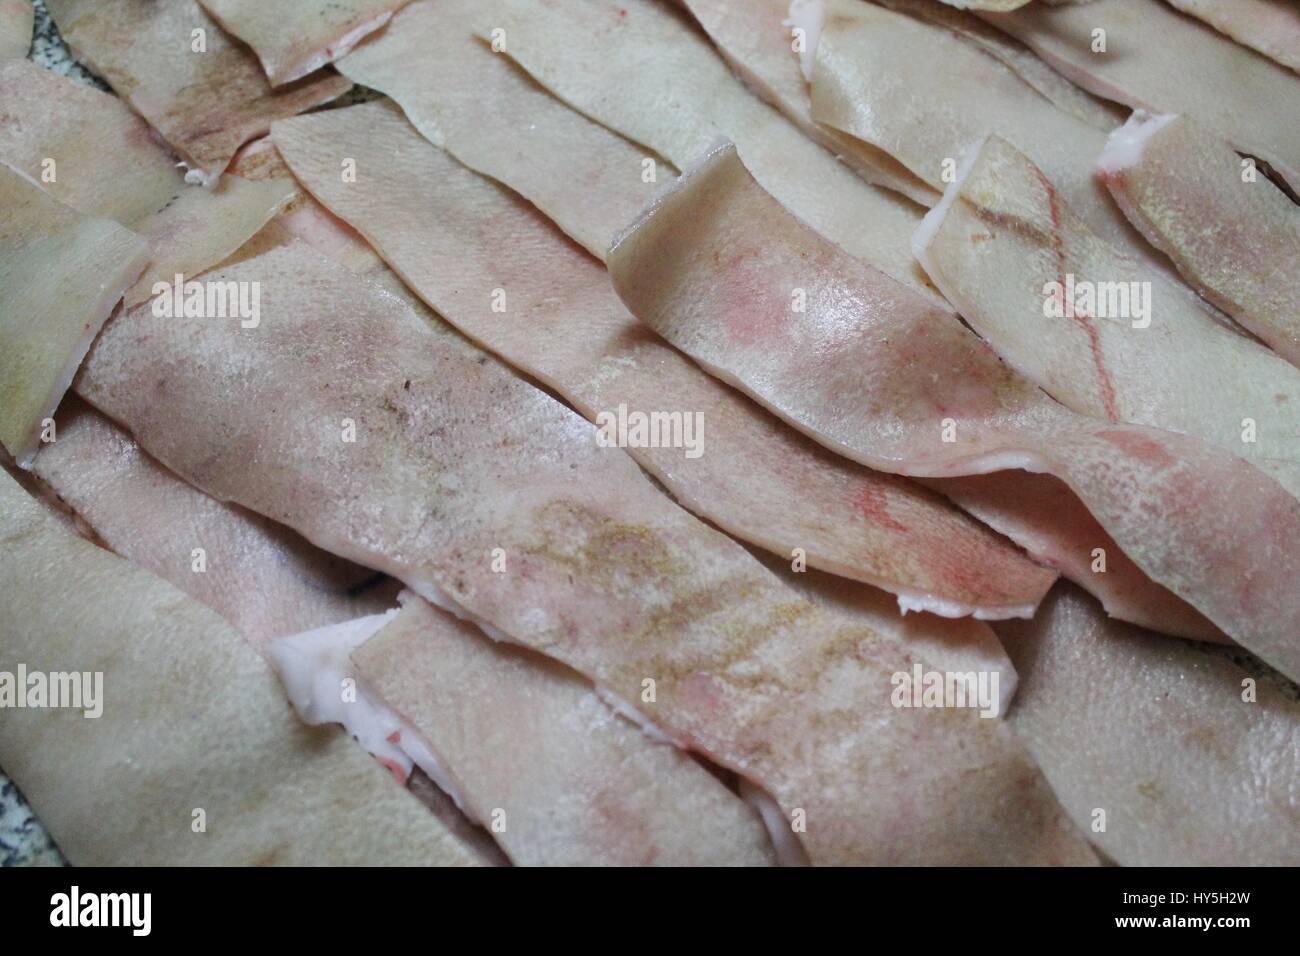 fresh pink pork skin with blood use in many industry begin from cook , technology and fashion Stock Photo